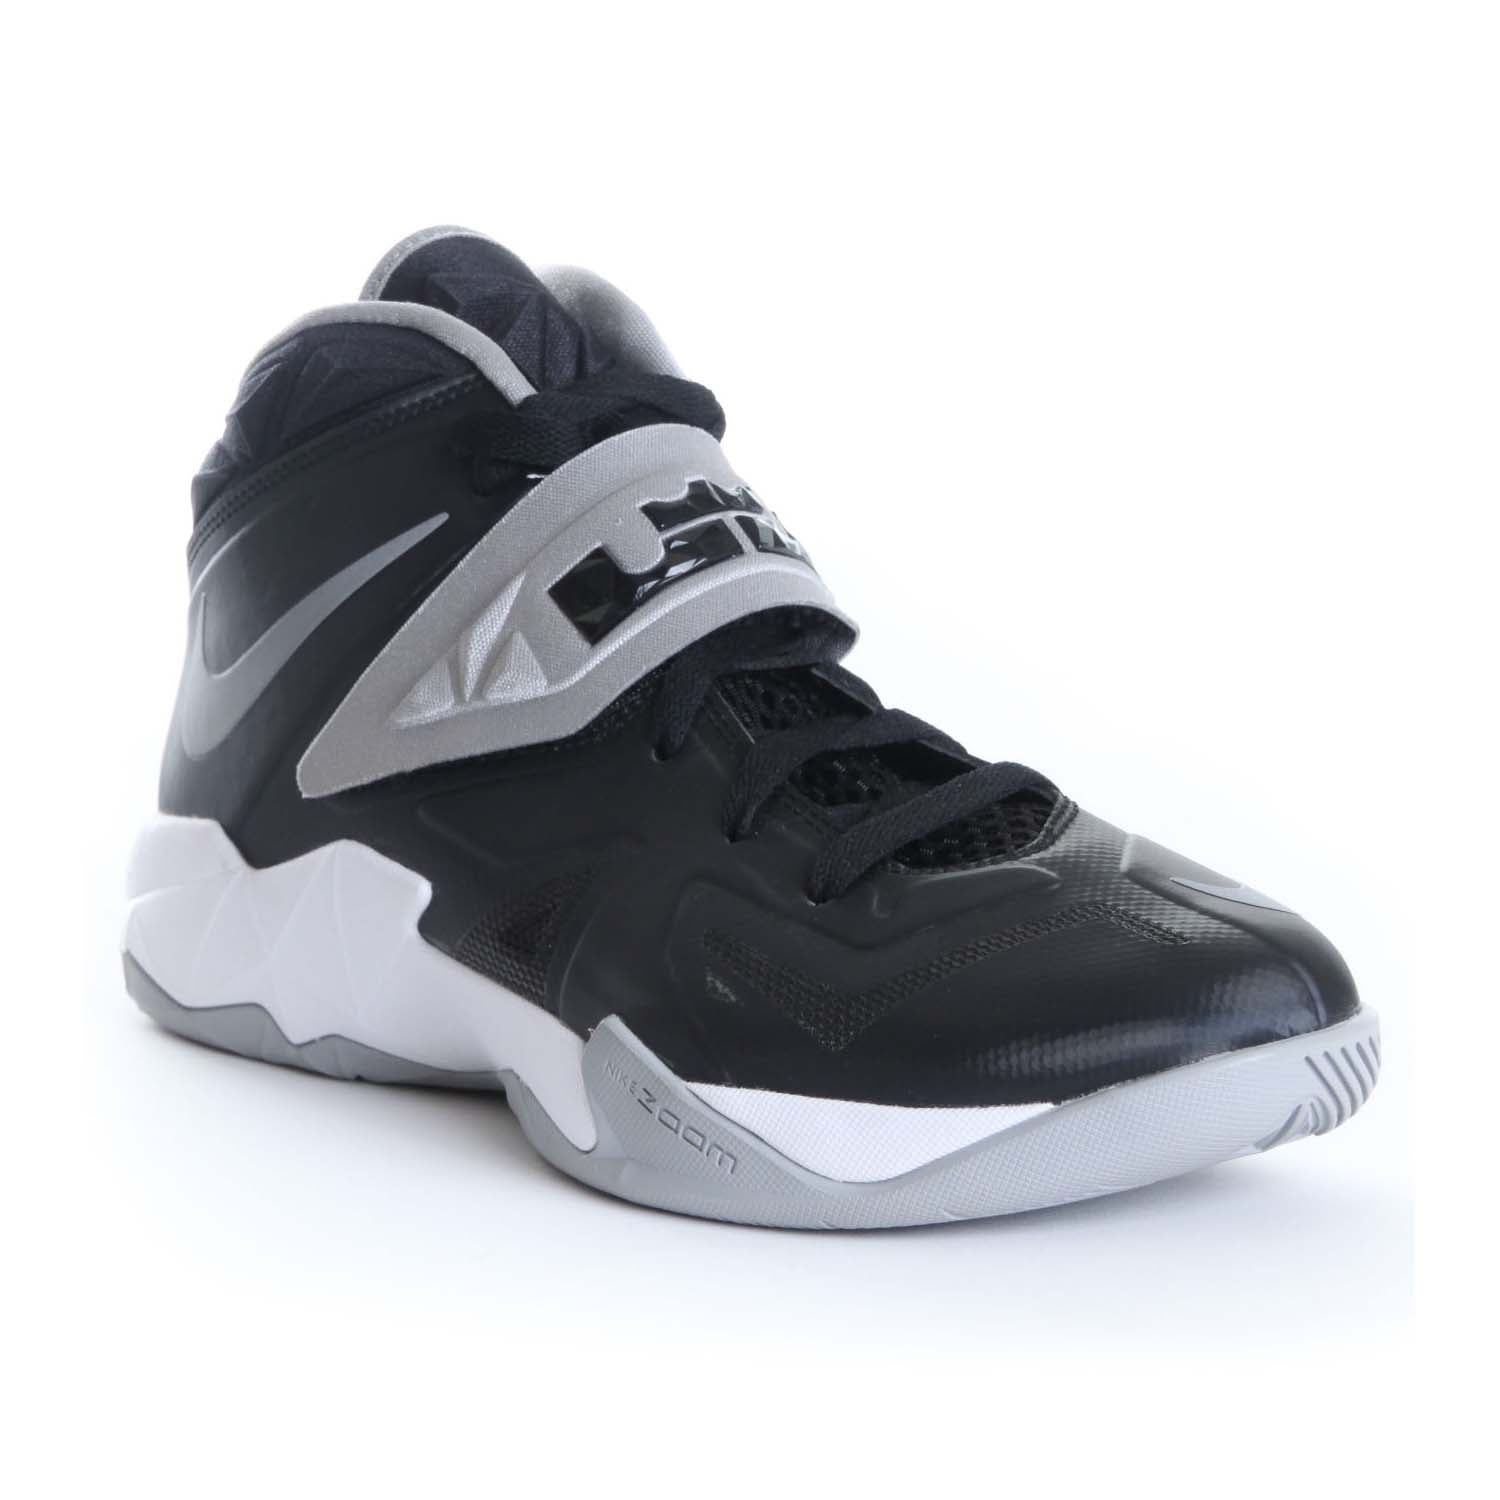 Nike, Shoes, Nike Lebron James 7 Zoom Soldier Vii Midtop Basketball Shoes